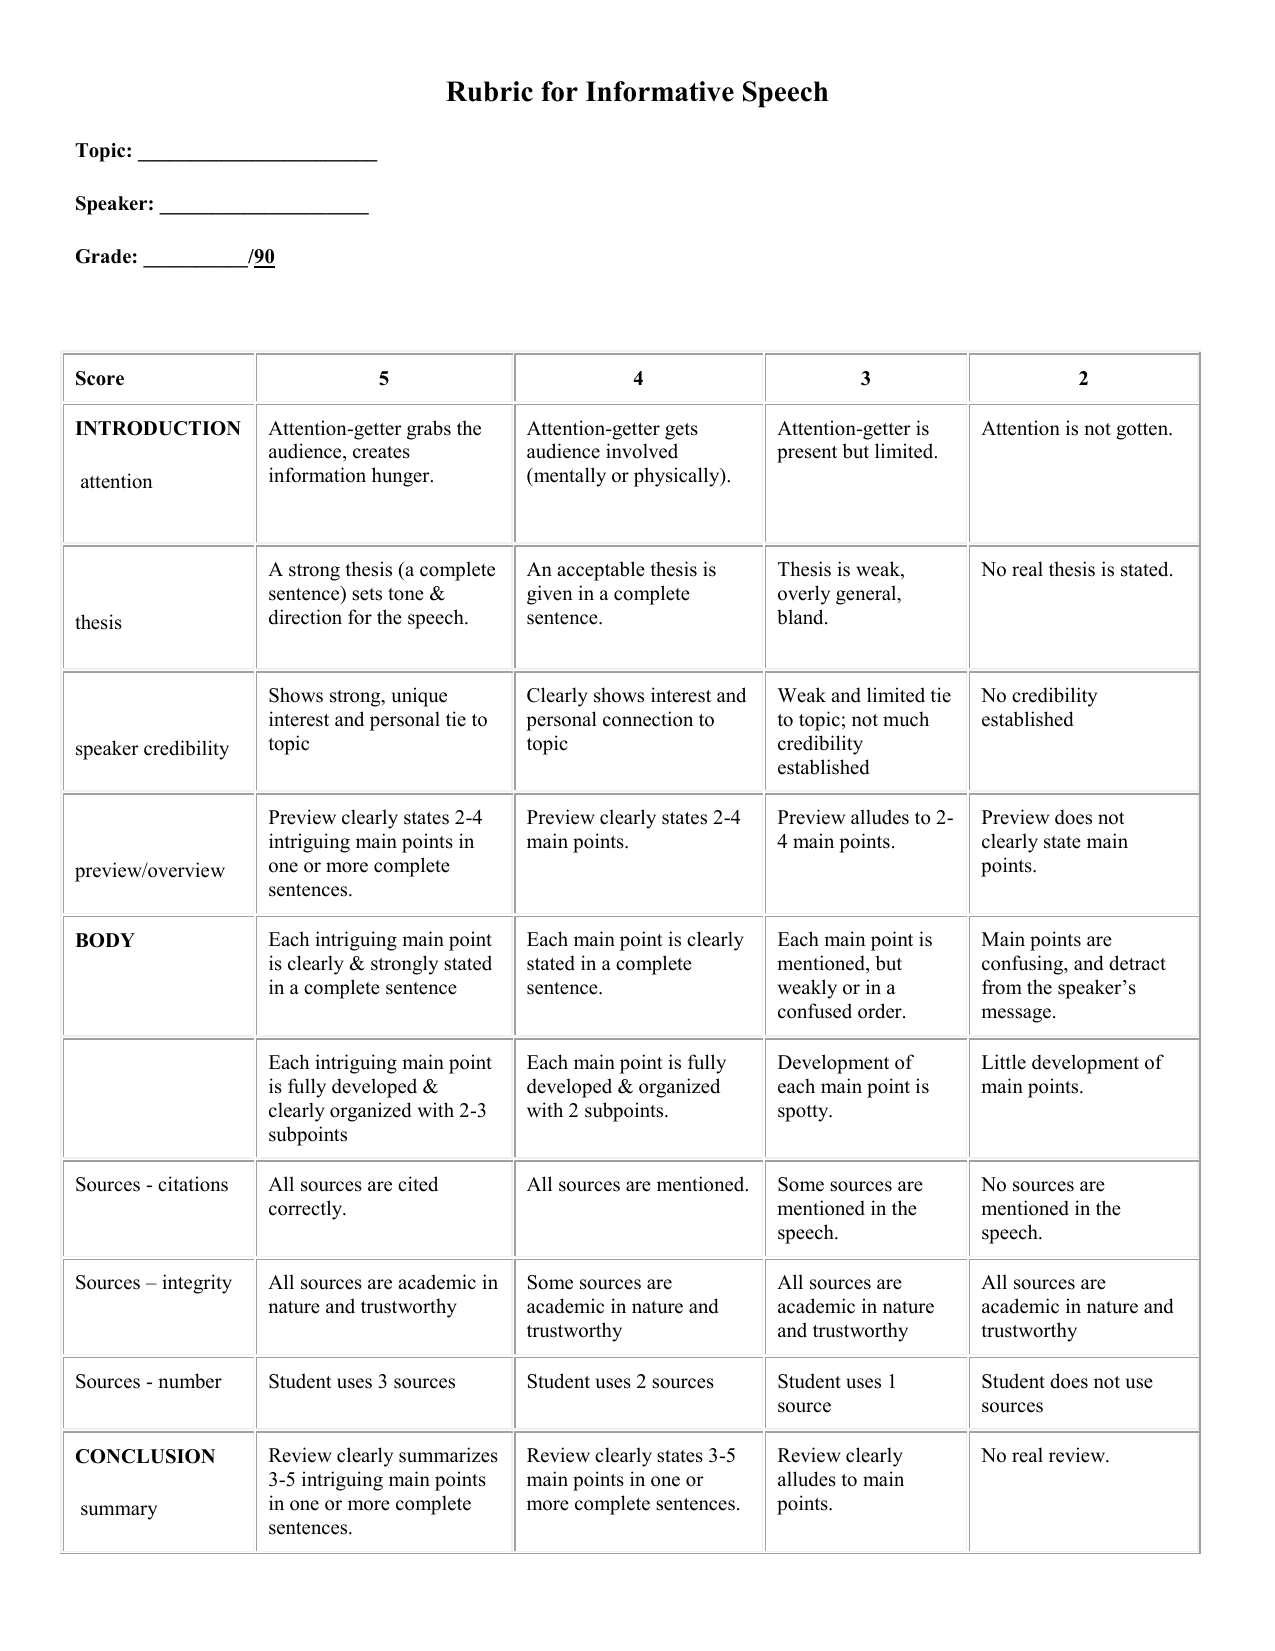 rubric for giving a speech